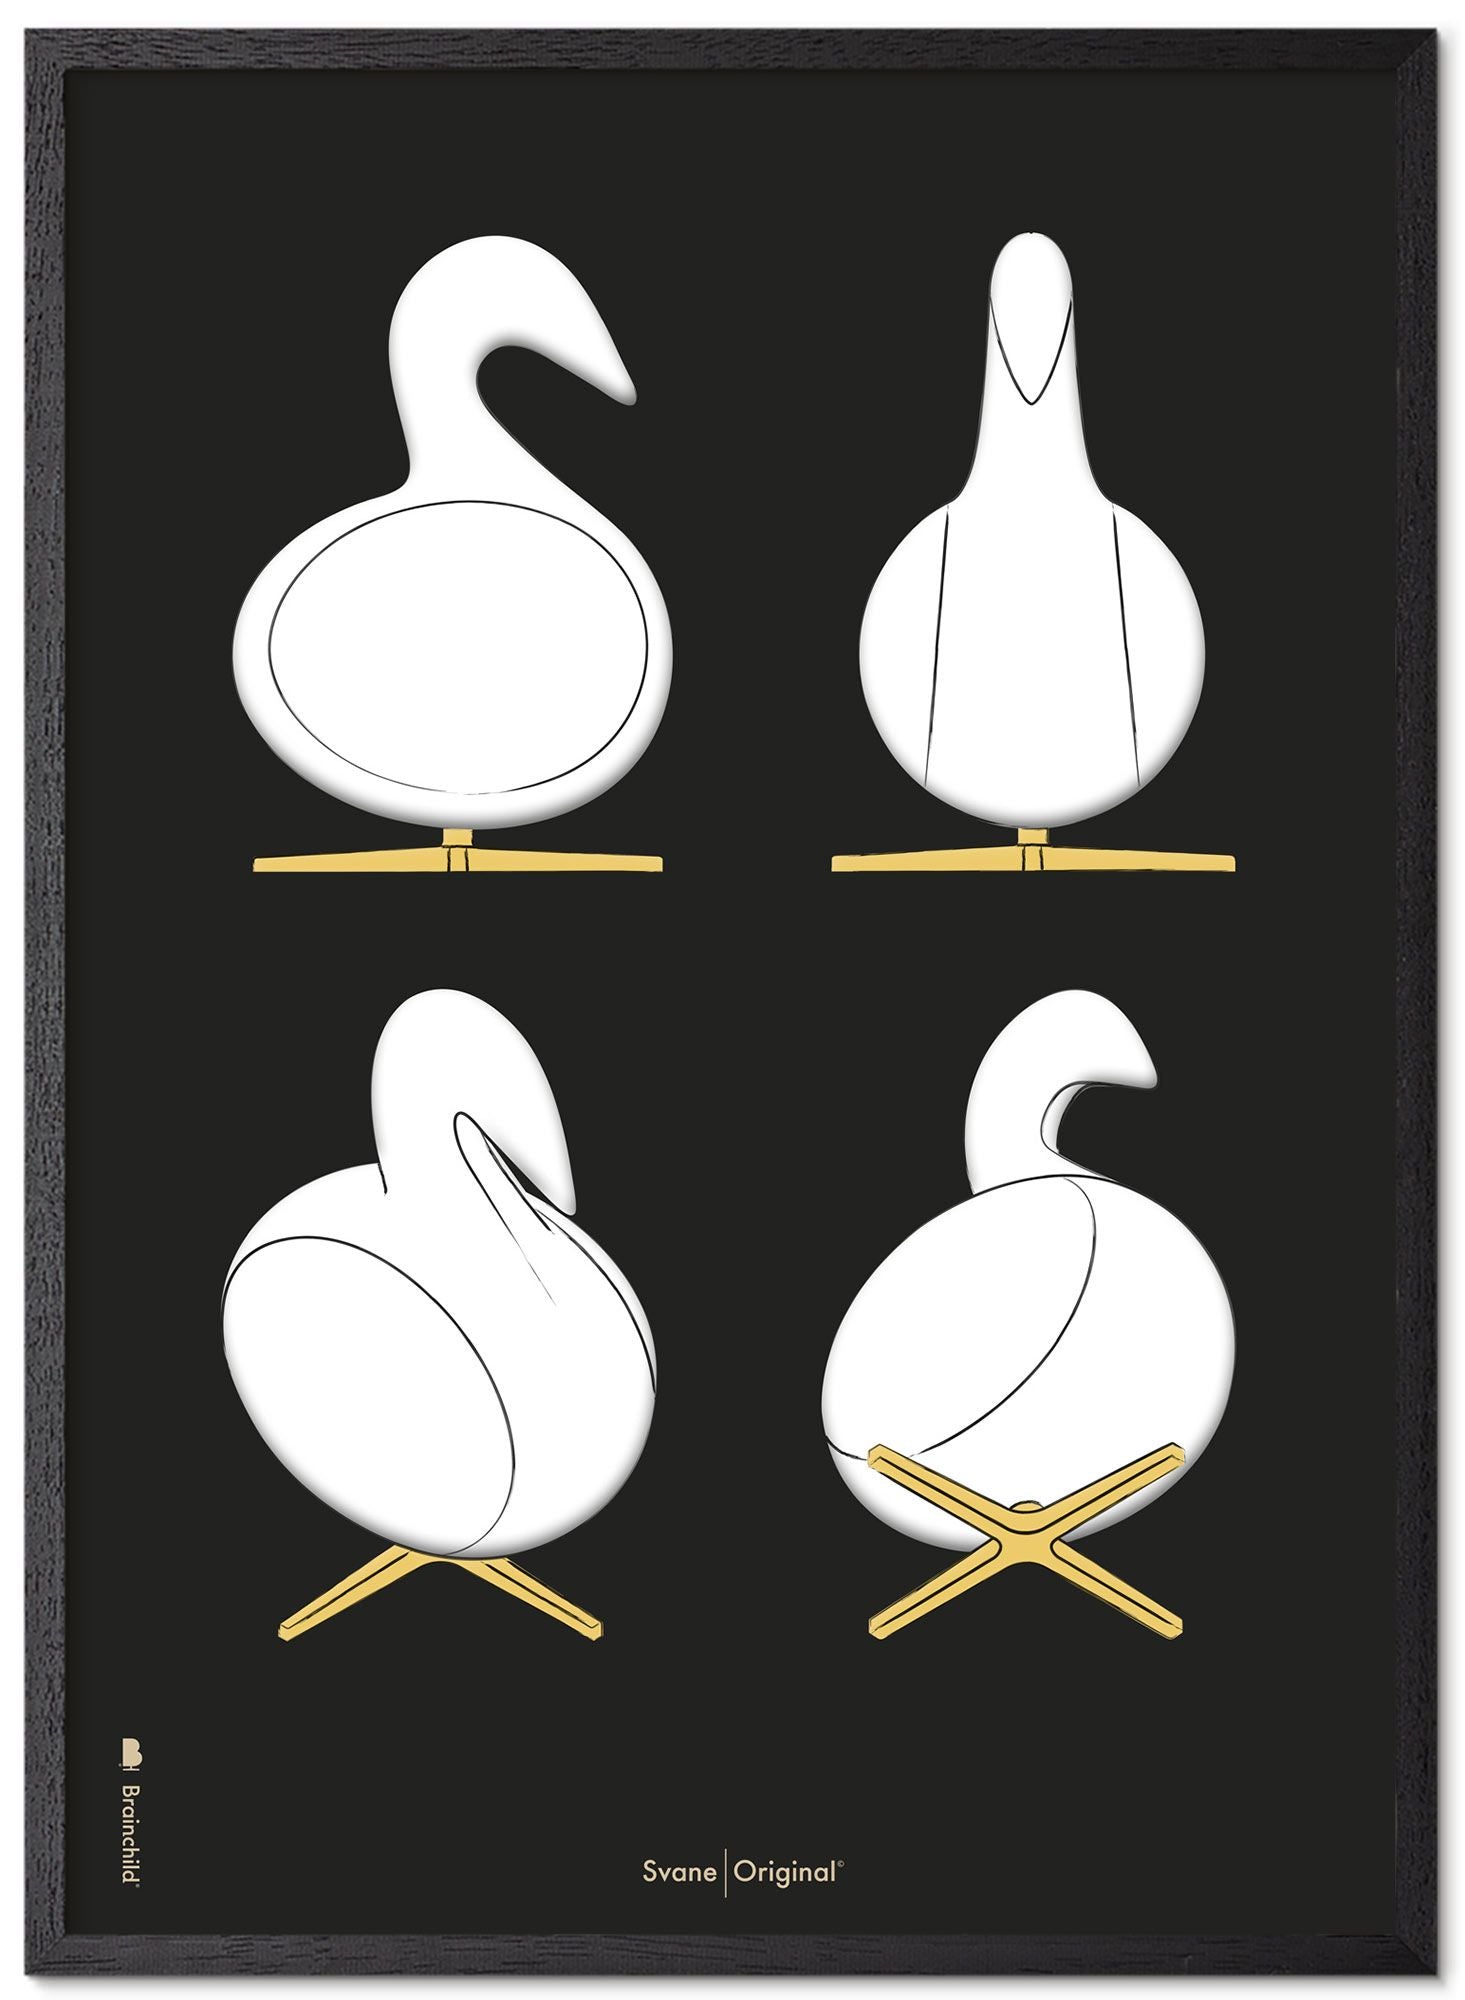 Brainchild Swan Design Sketches Poster Frame Made Of Black Lacquered Wood A5, Black Background